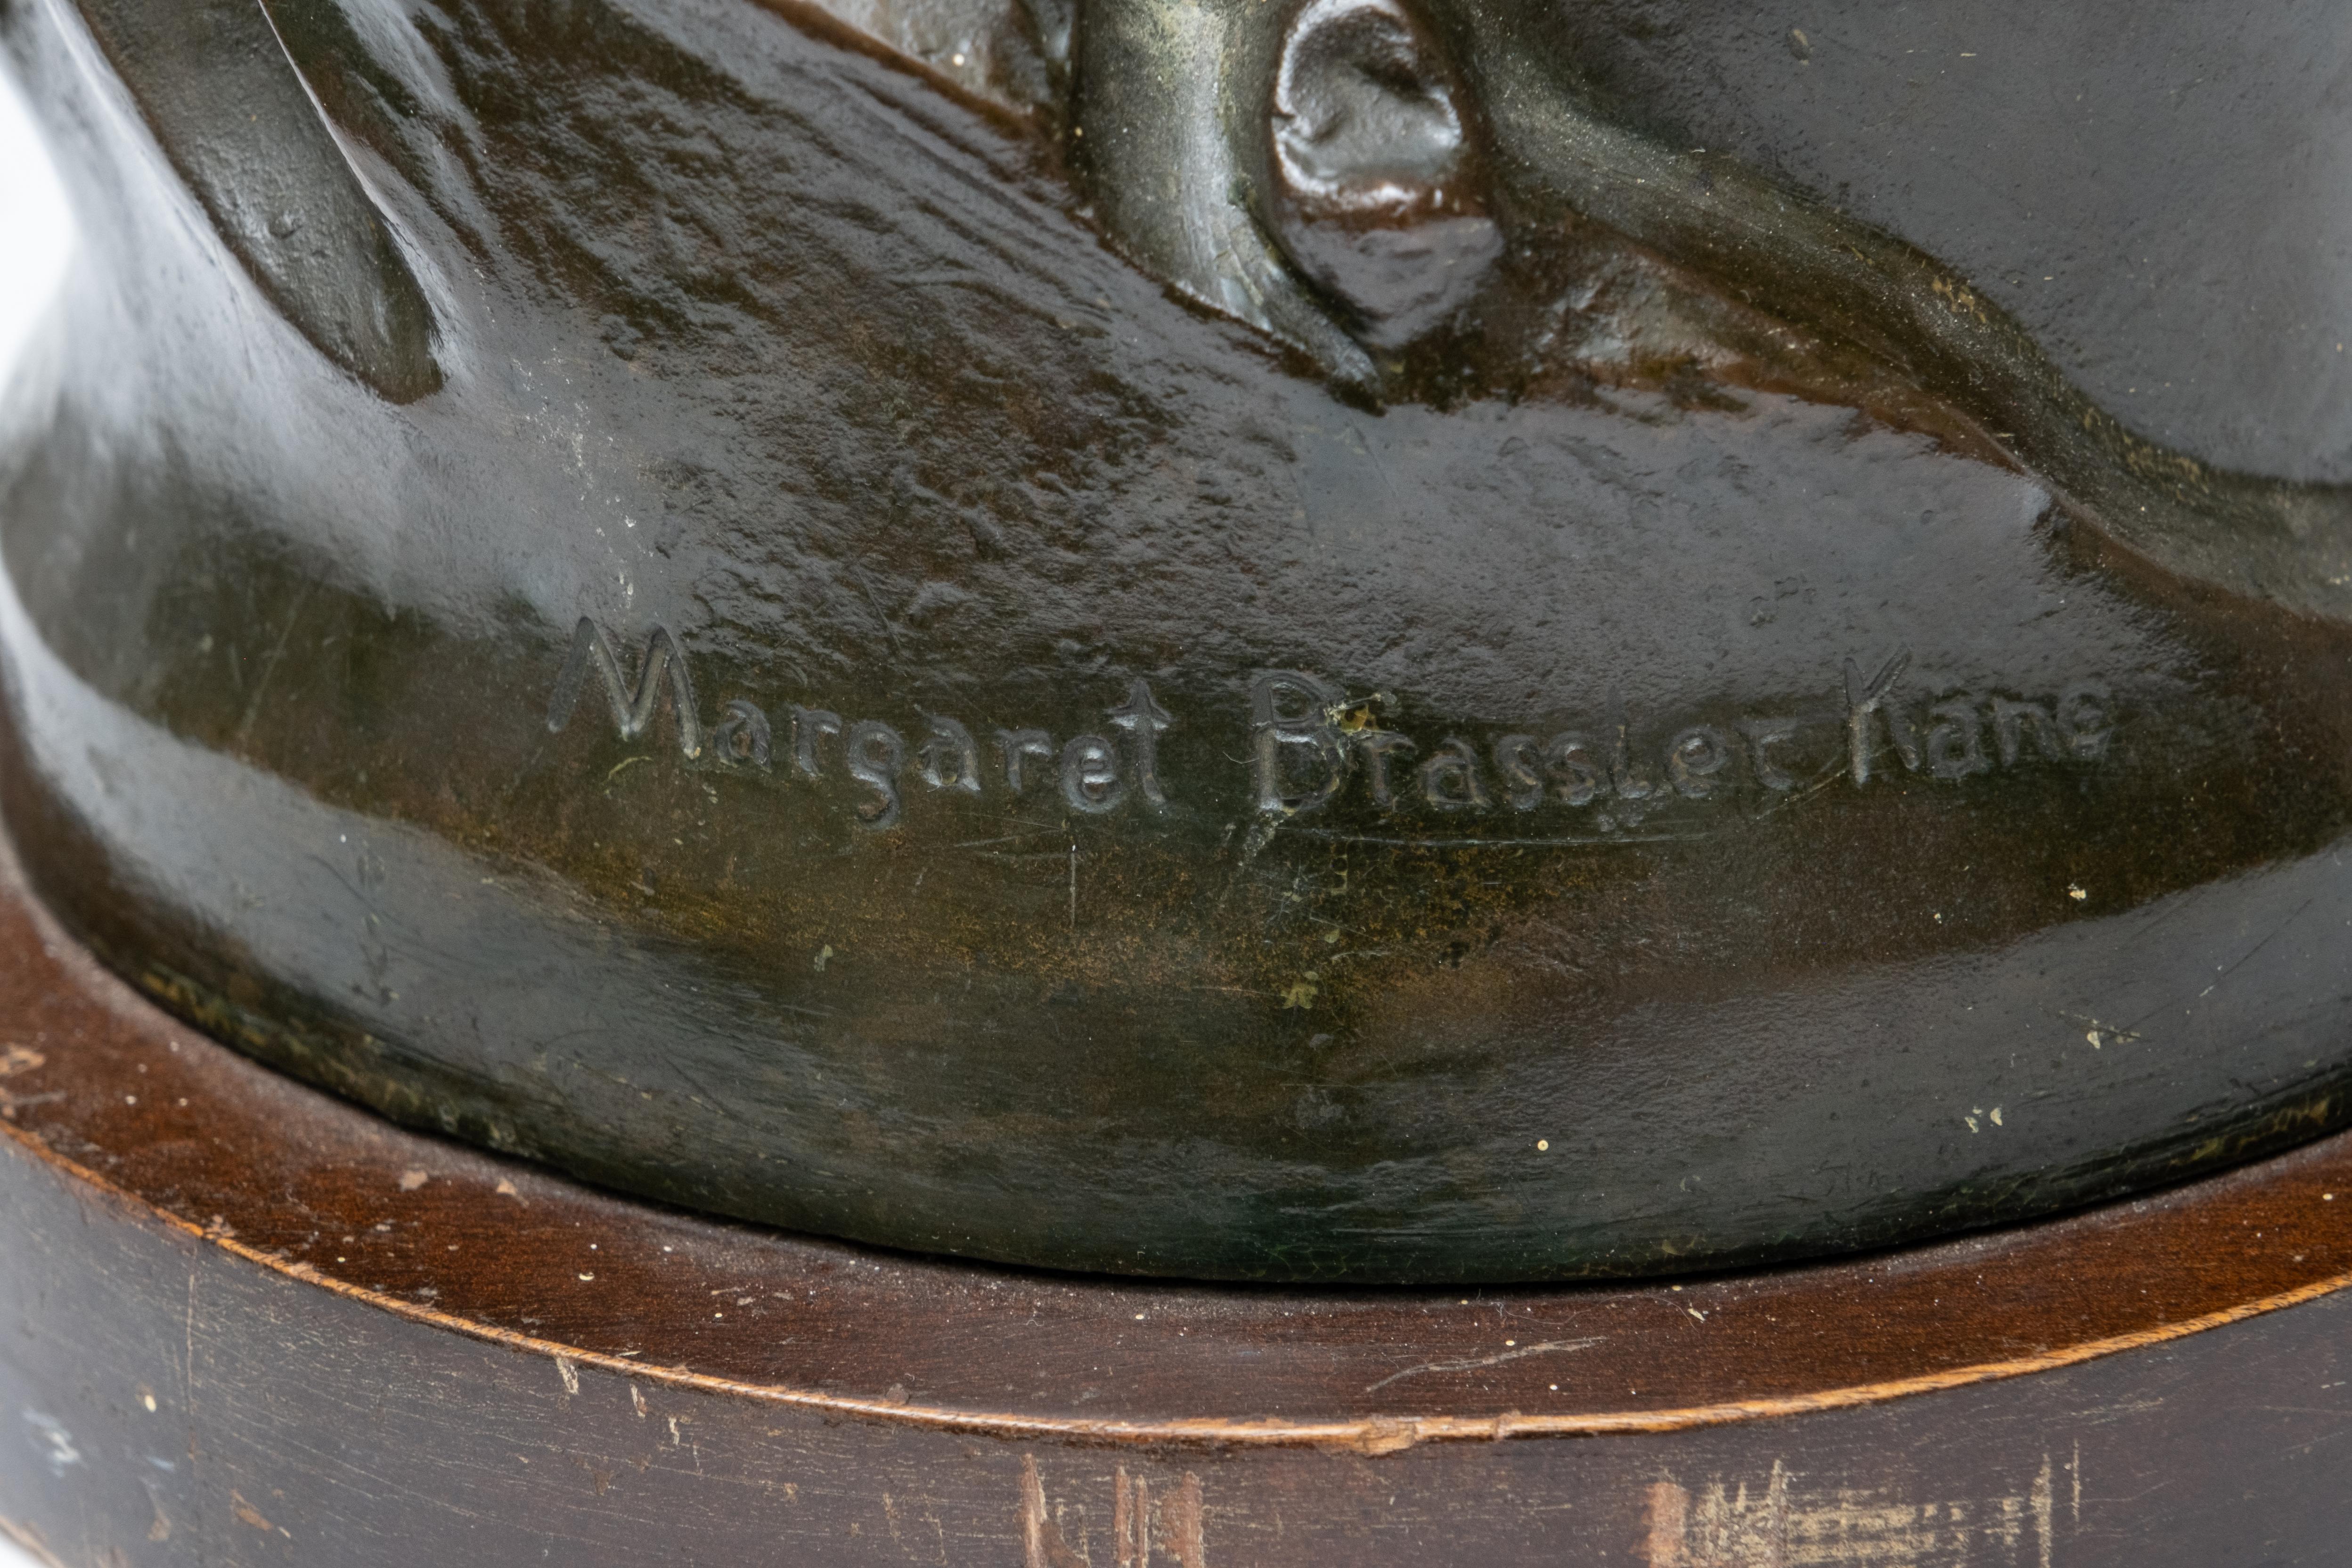 Margaret Brassler Kane Signed Bronze Lamp Base from the collection of noted collector and respected gallery owner, Kenneth Dukoff  of Niagara Falls, NY

Margaret Brassler Kane Signed Bronze modernist figural Lamp Base 